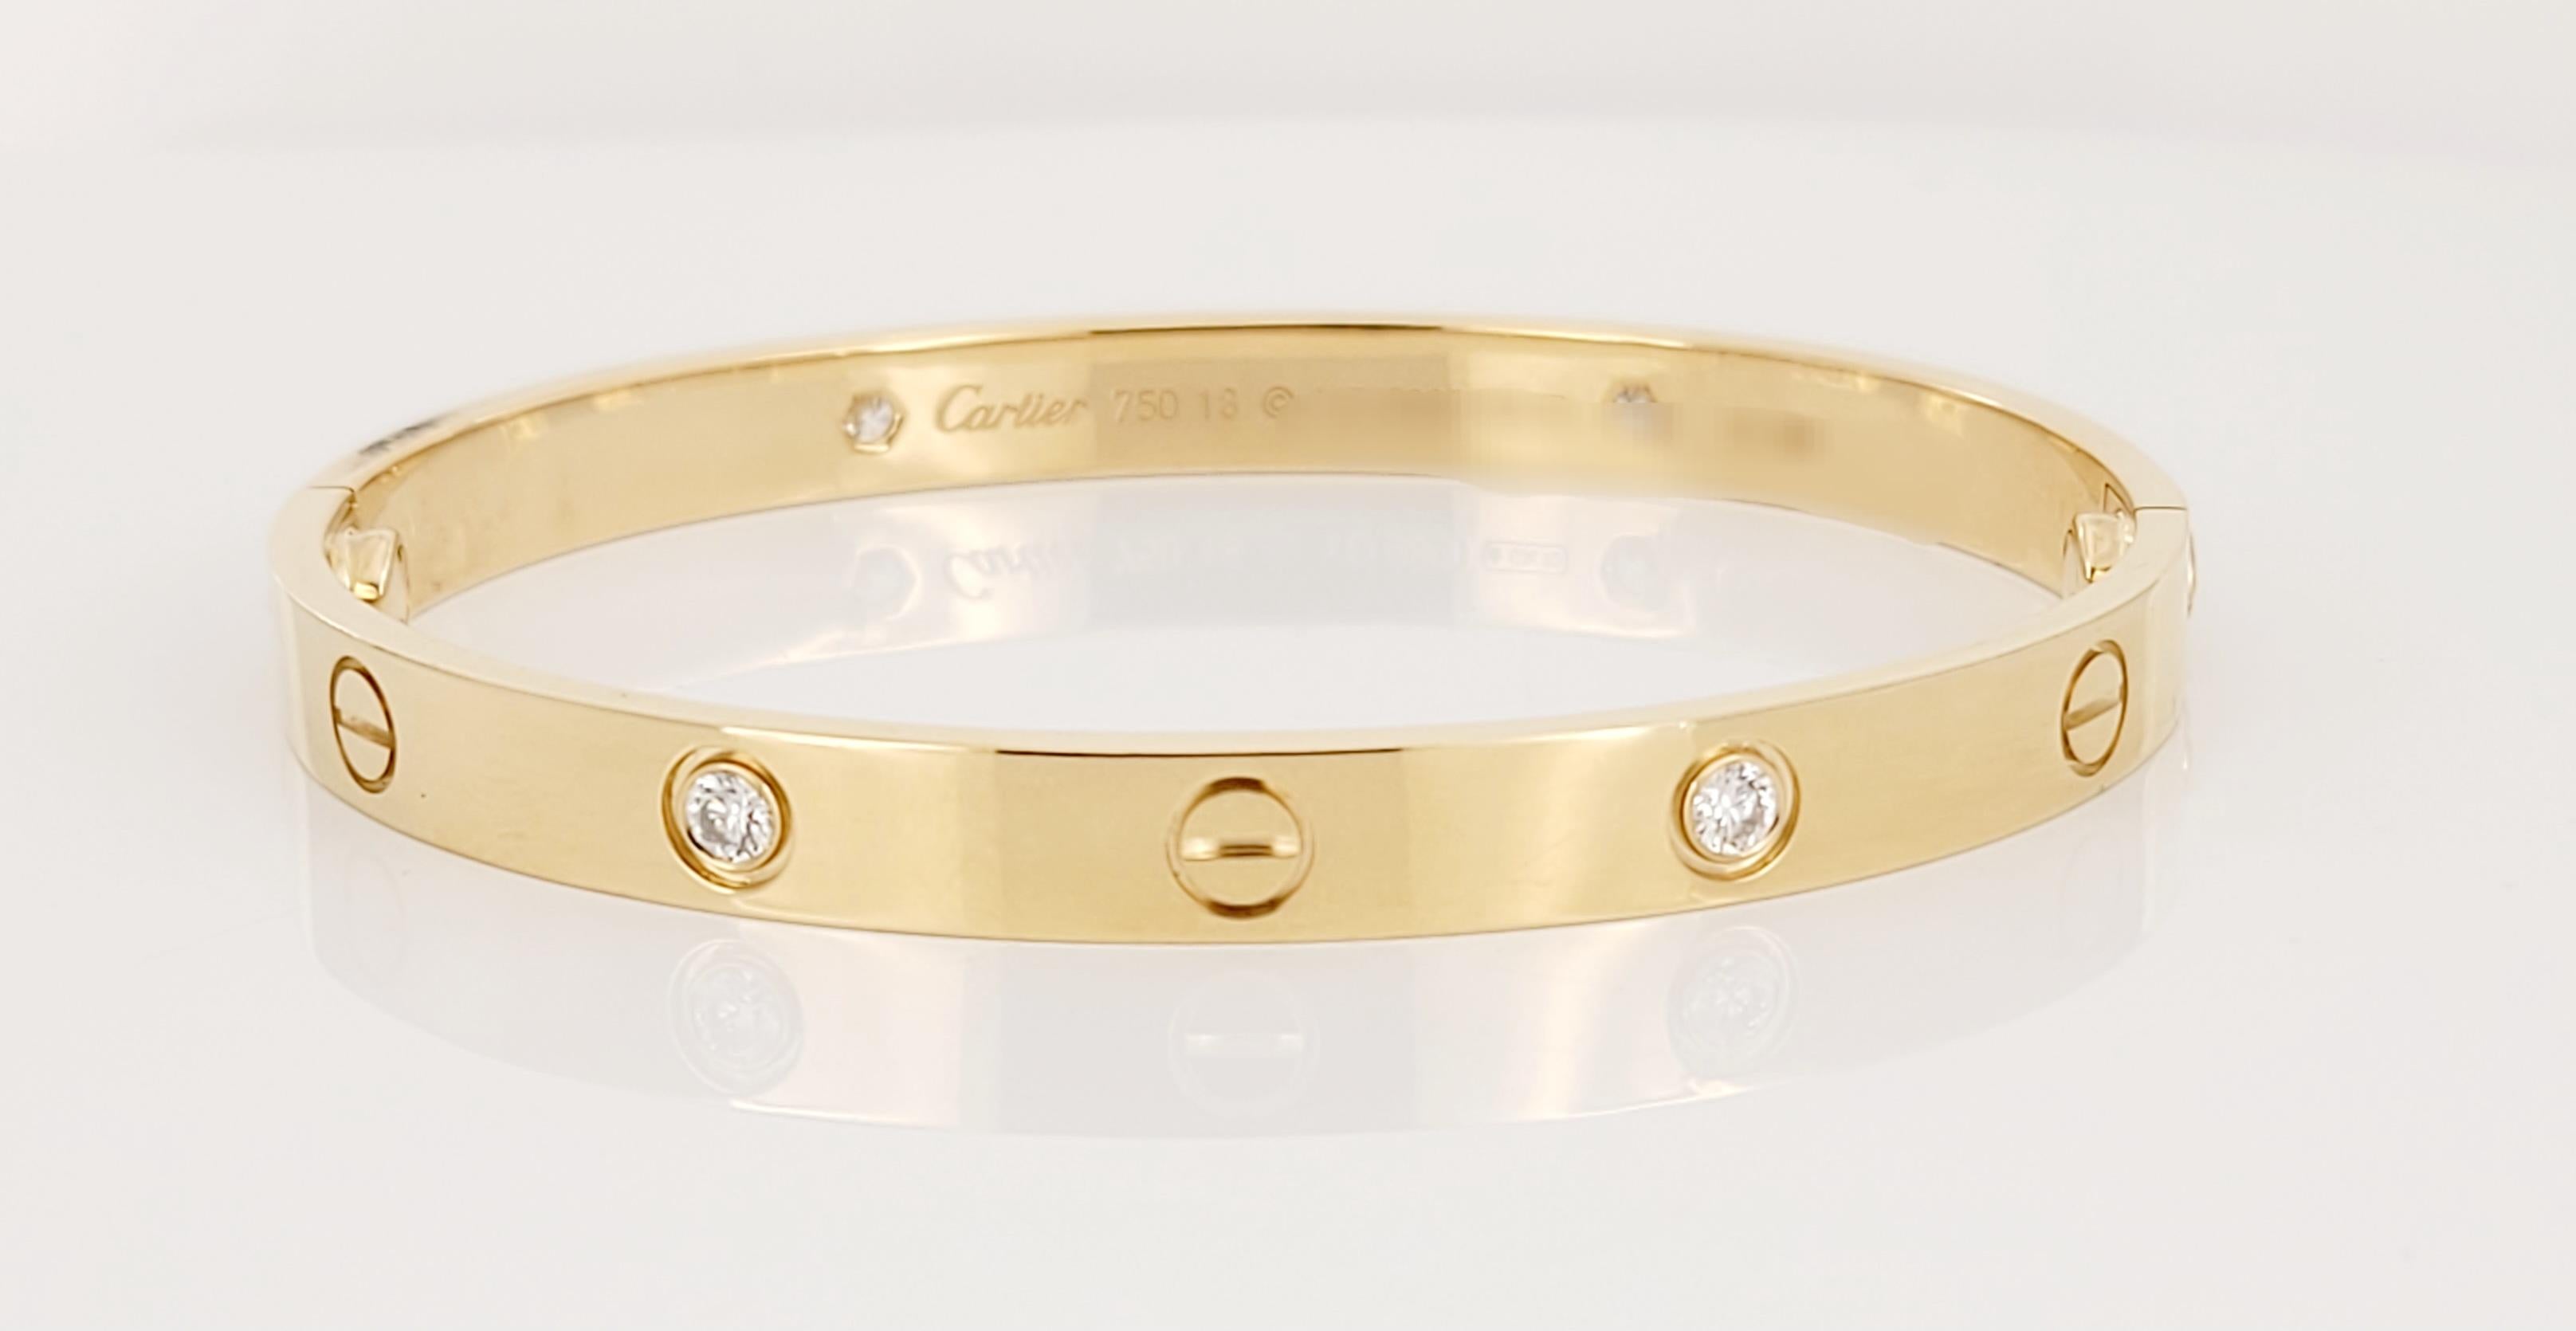 Collection: Cartier 
Style: Love
Metal Yellow Gold
Metal Purity: 18K 
Stones: 4 Round Brilliant Cut Diamonds
Bracelet Size: Medium 18 
Condition: Mint 
Comes with Cartier Bracelet Box. No papers included